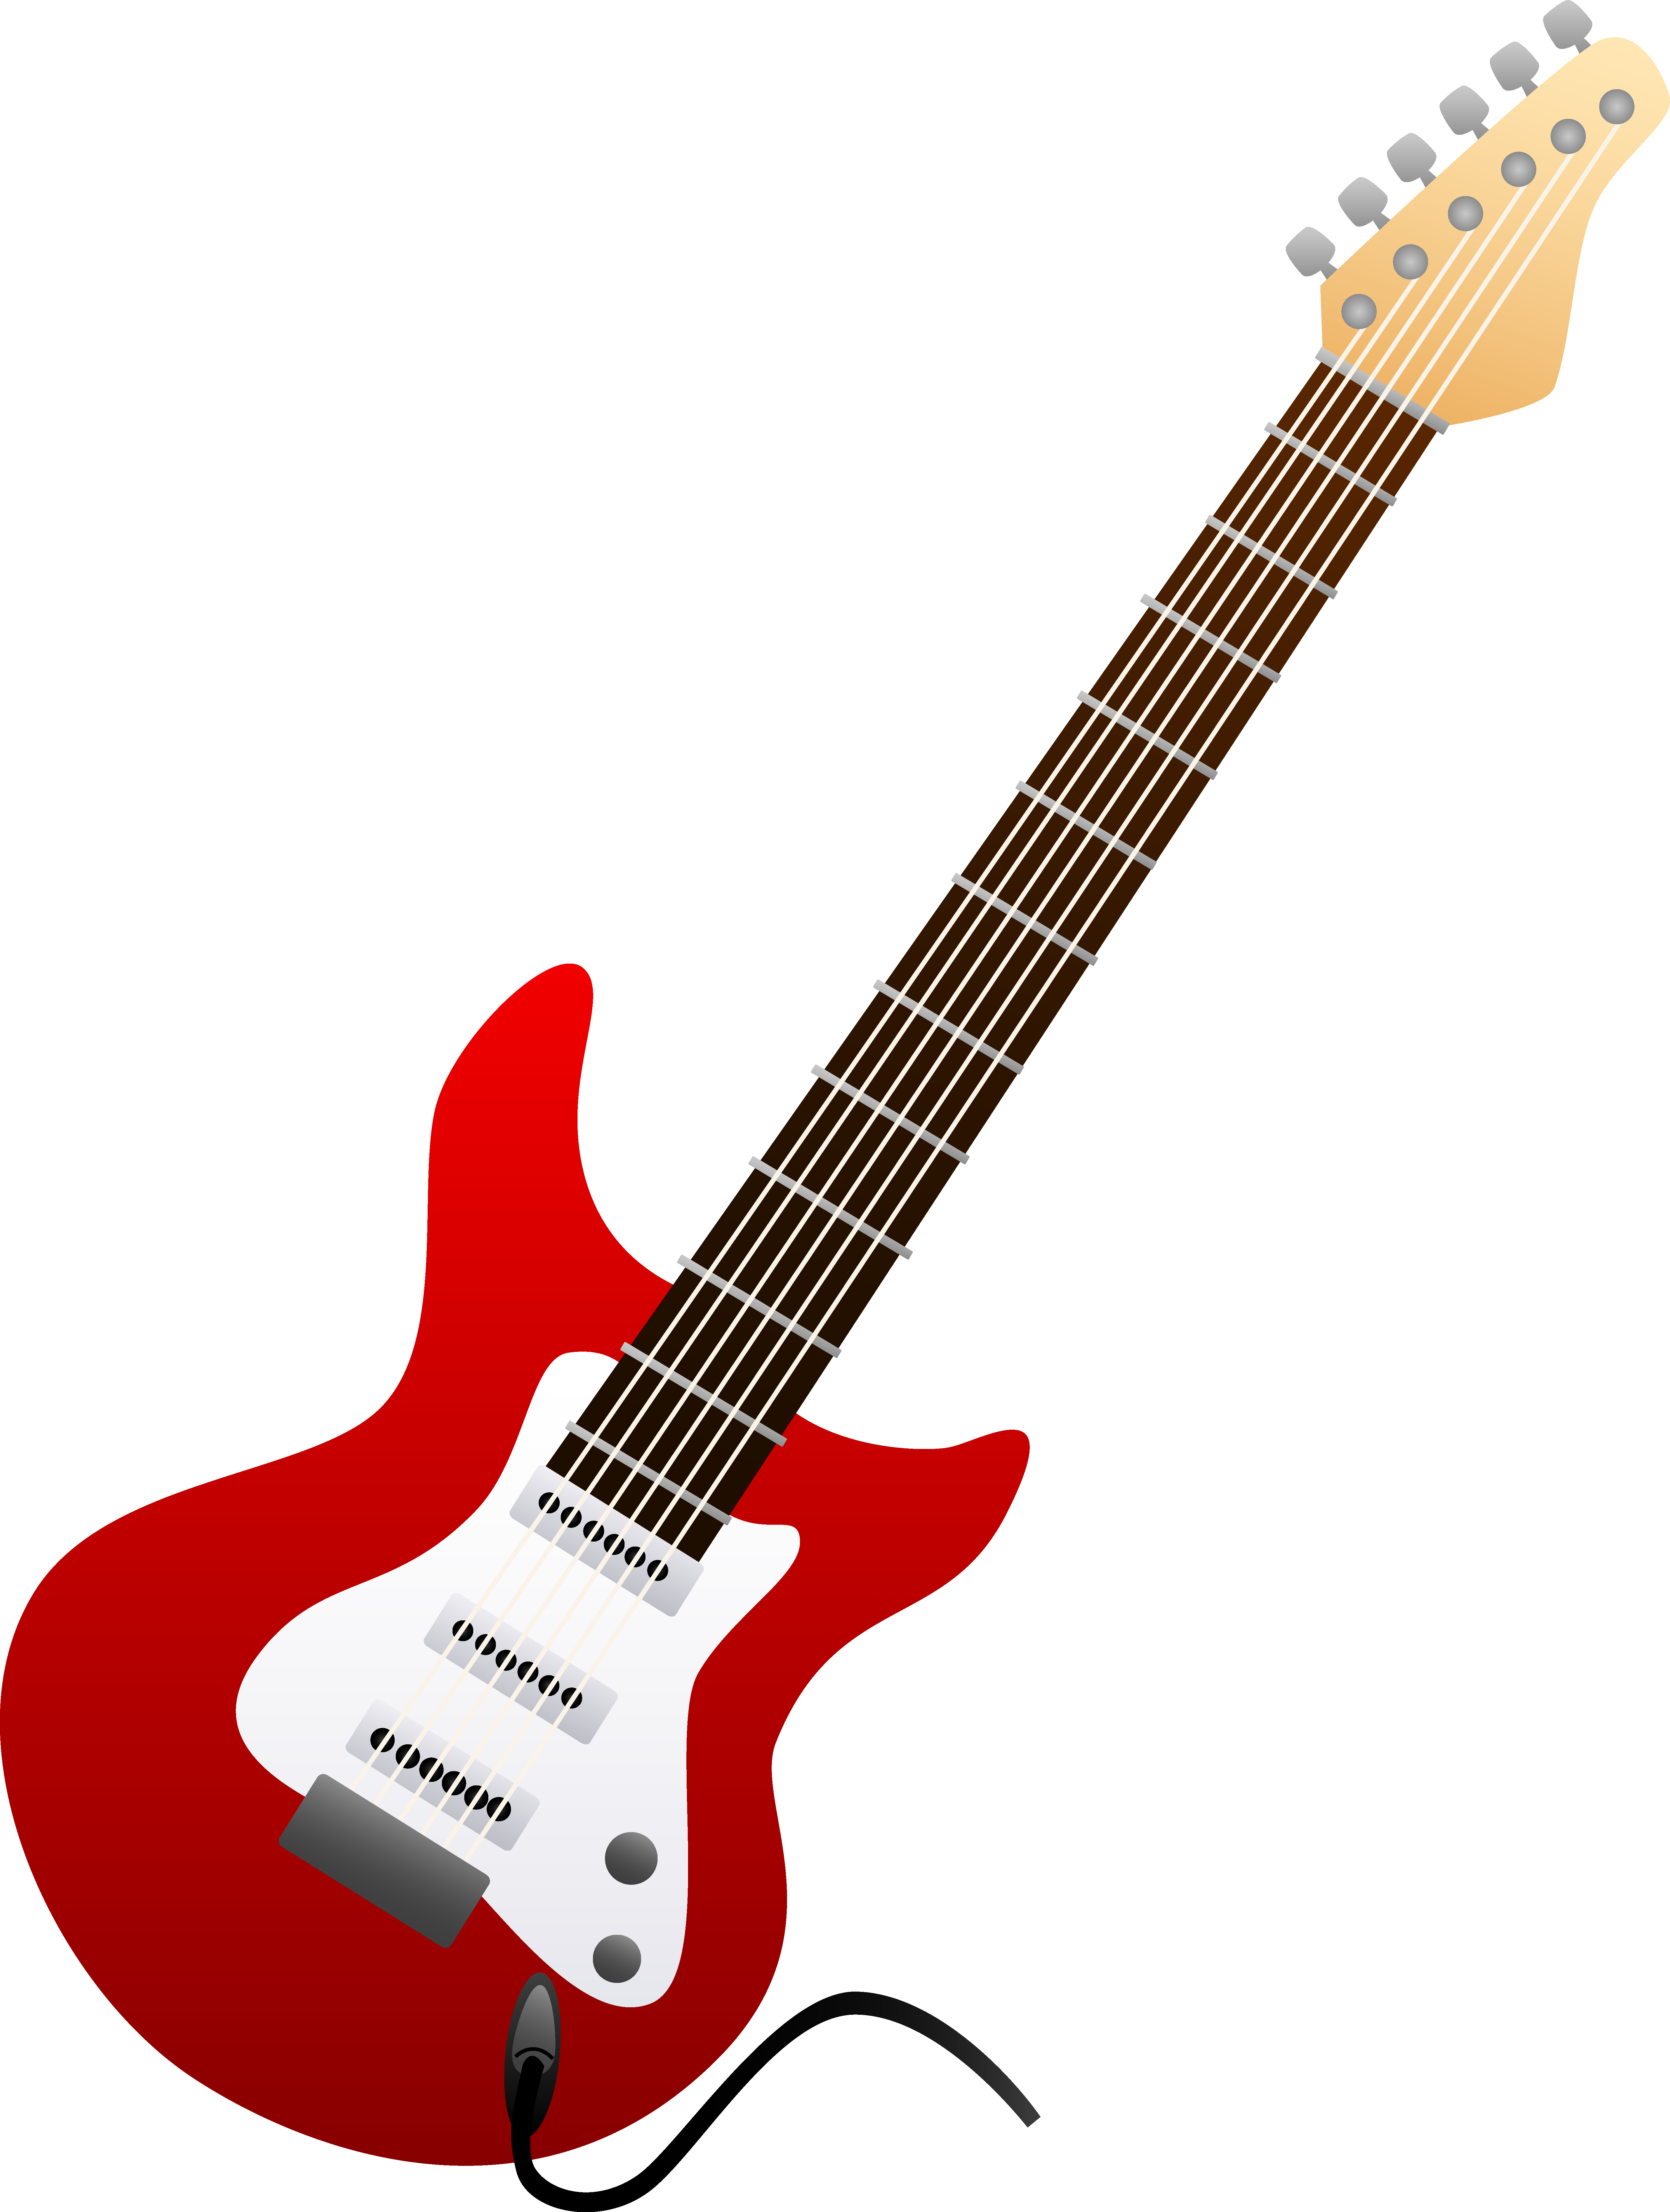 Rock star clipart free download clip art on 2